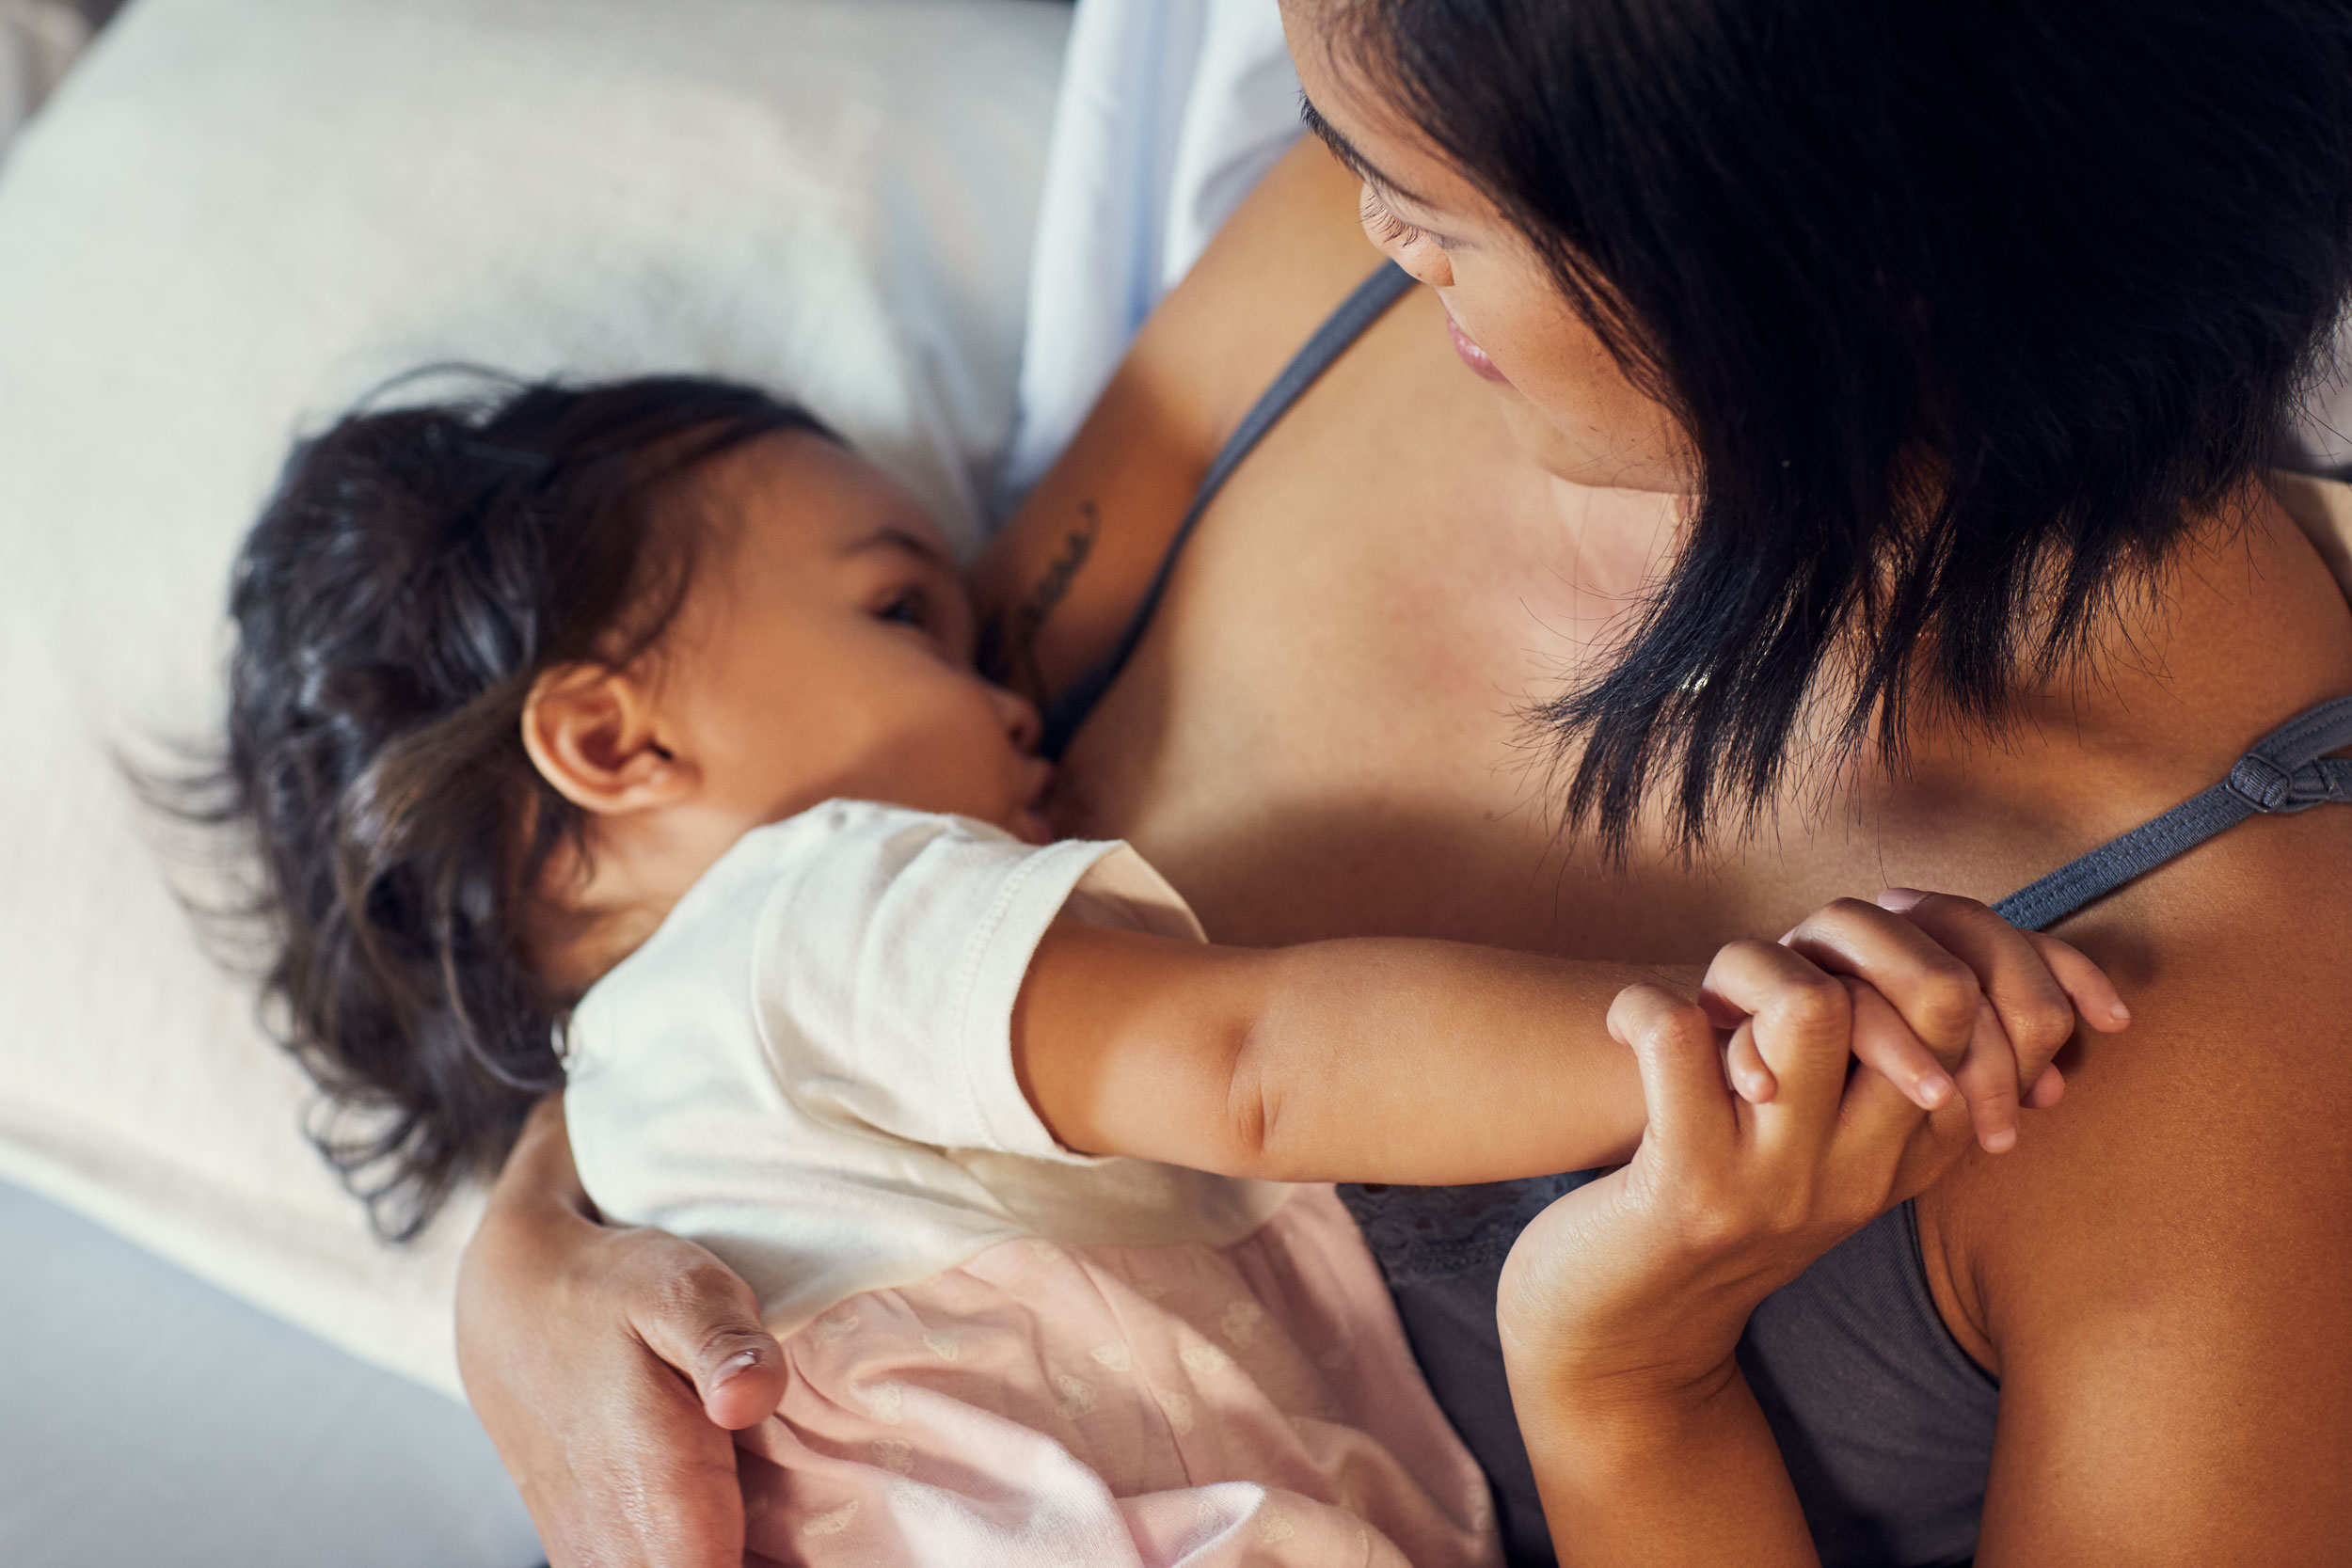 mom breastfeeding baby while holding hands, washington dc commercial photography